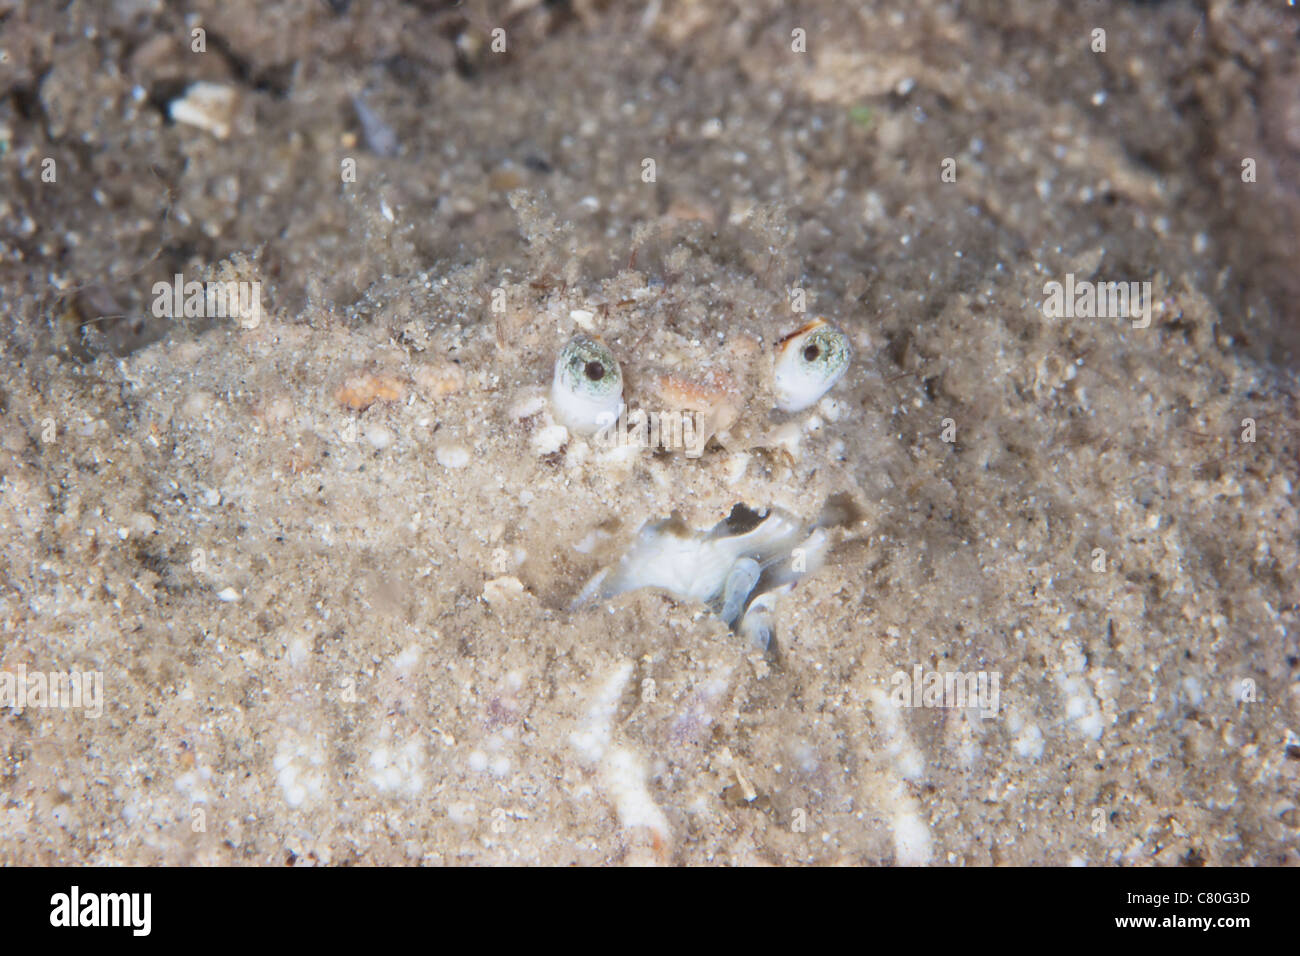 Box Crab burrows in the sand waiting for its next meal, Papua New Guinea. Stock Photo